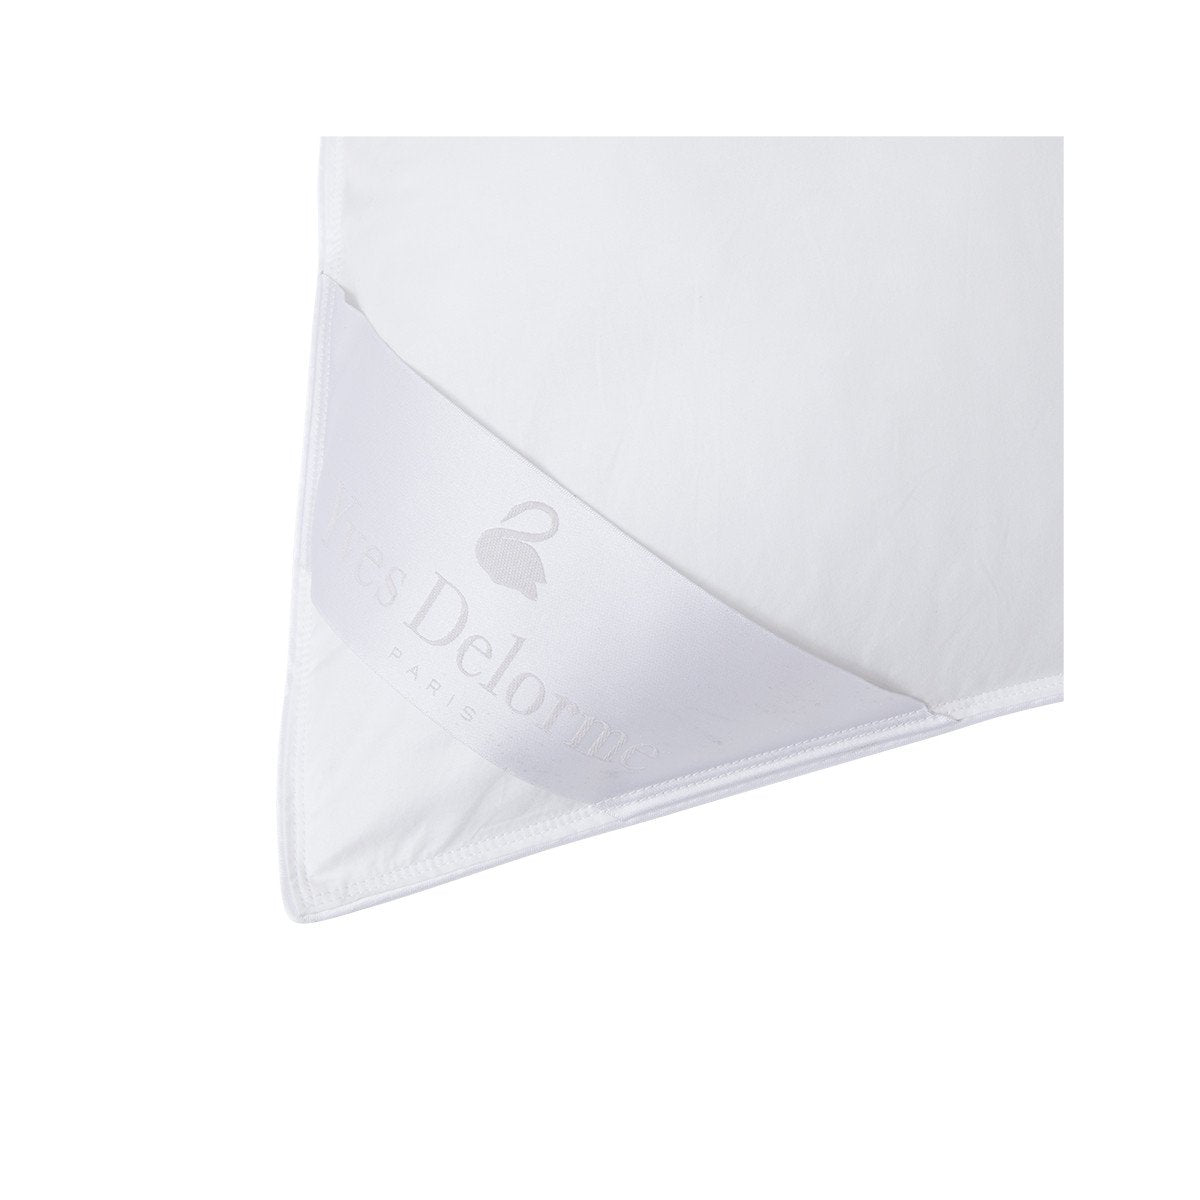 Fig Linens - Actuel Anti Allergy Down Alternative Pillows by Yves Delorme - Details